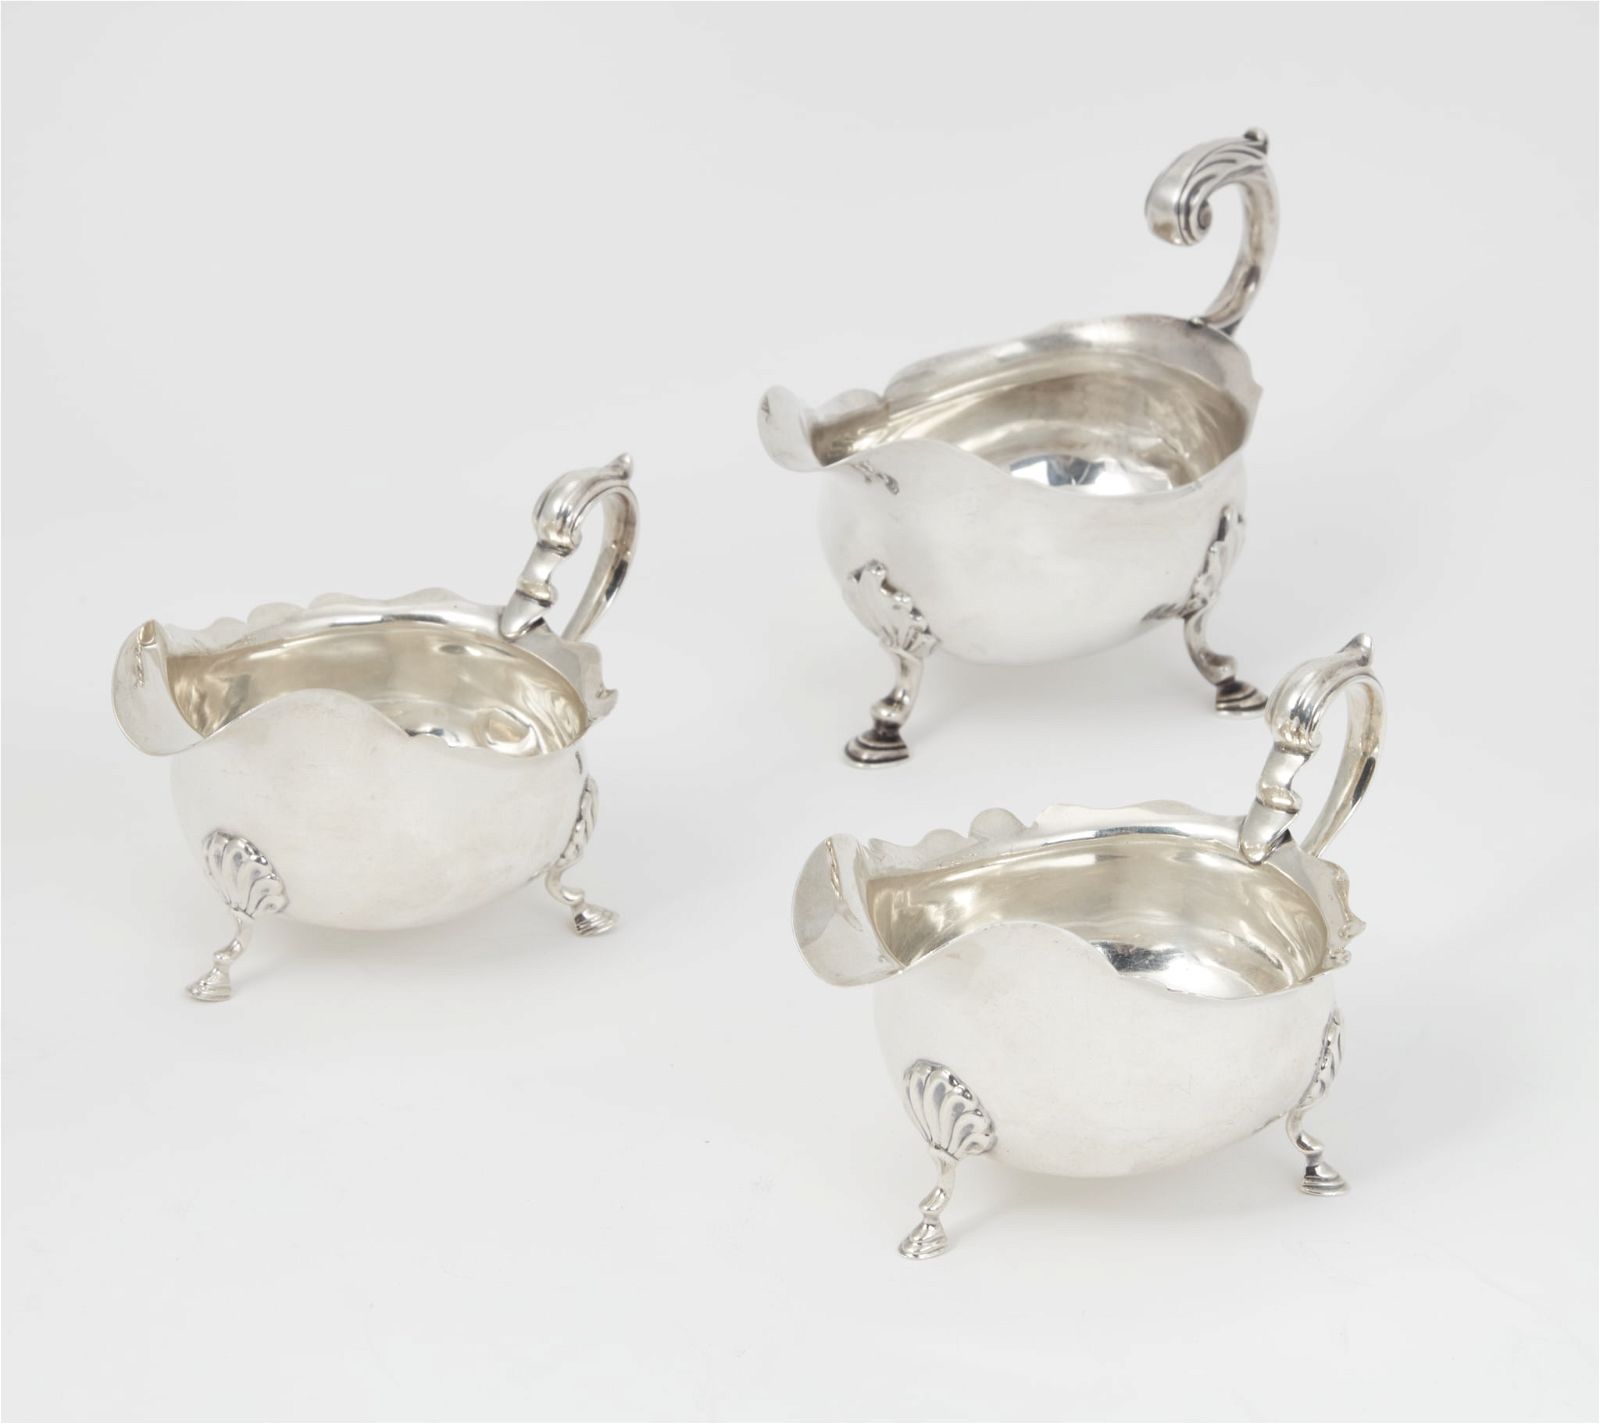 THREE ENGLISH STERLING SILVER SAUCE